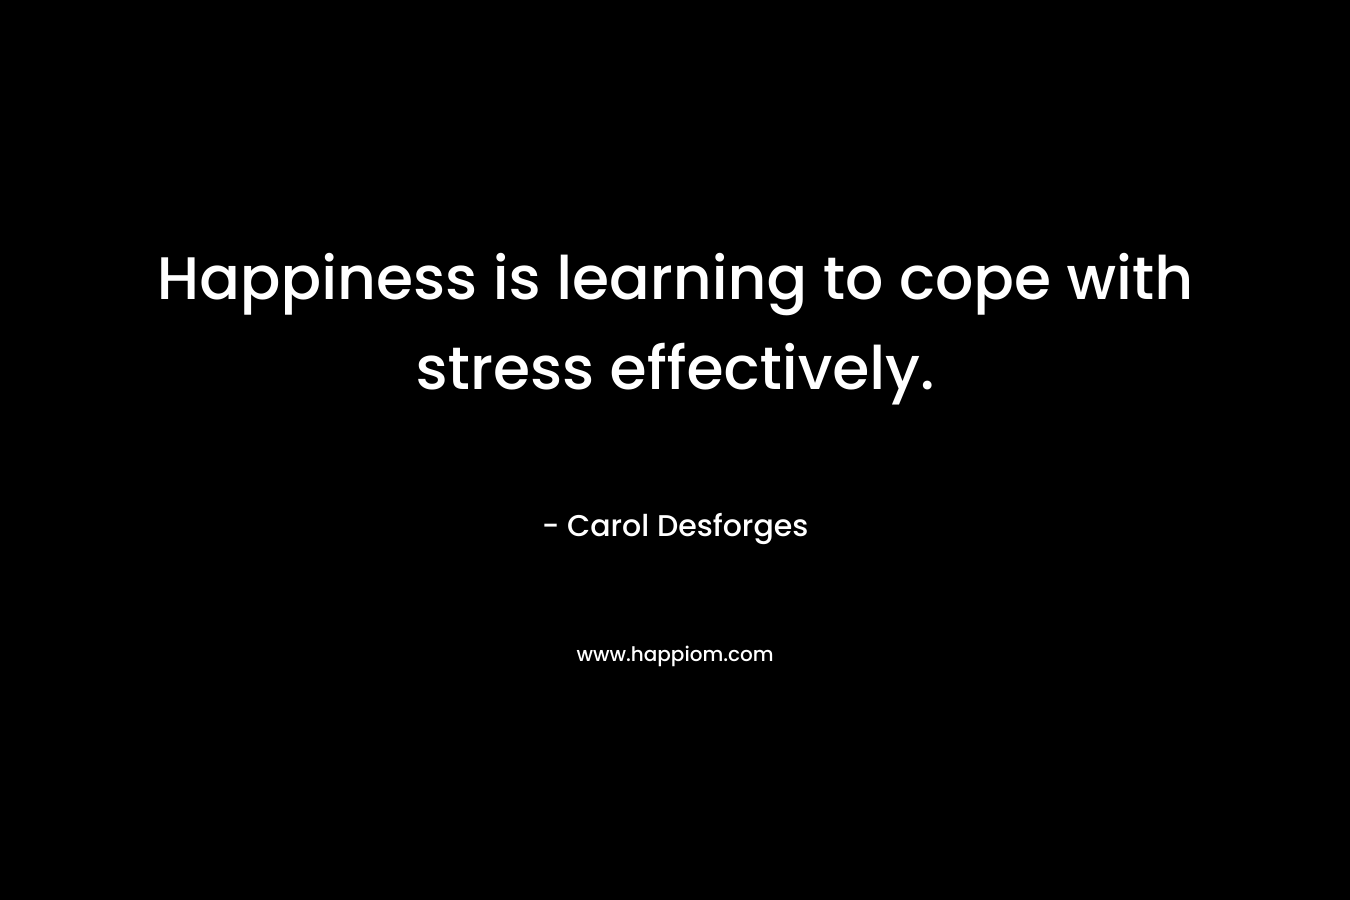 Happiness is learning to cope with stress effectively. – Carol Desforges